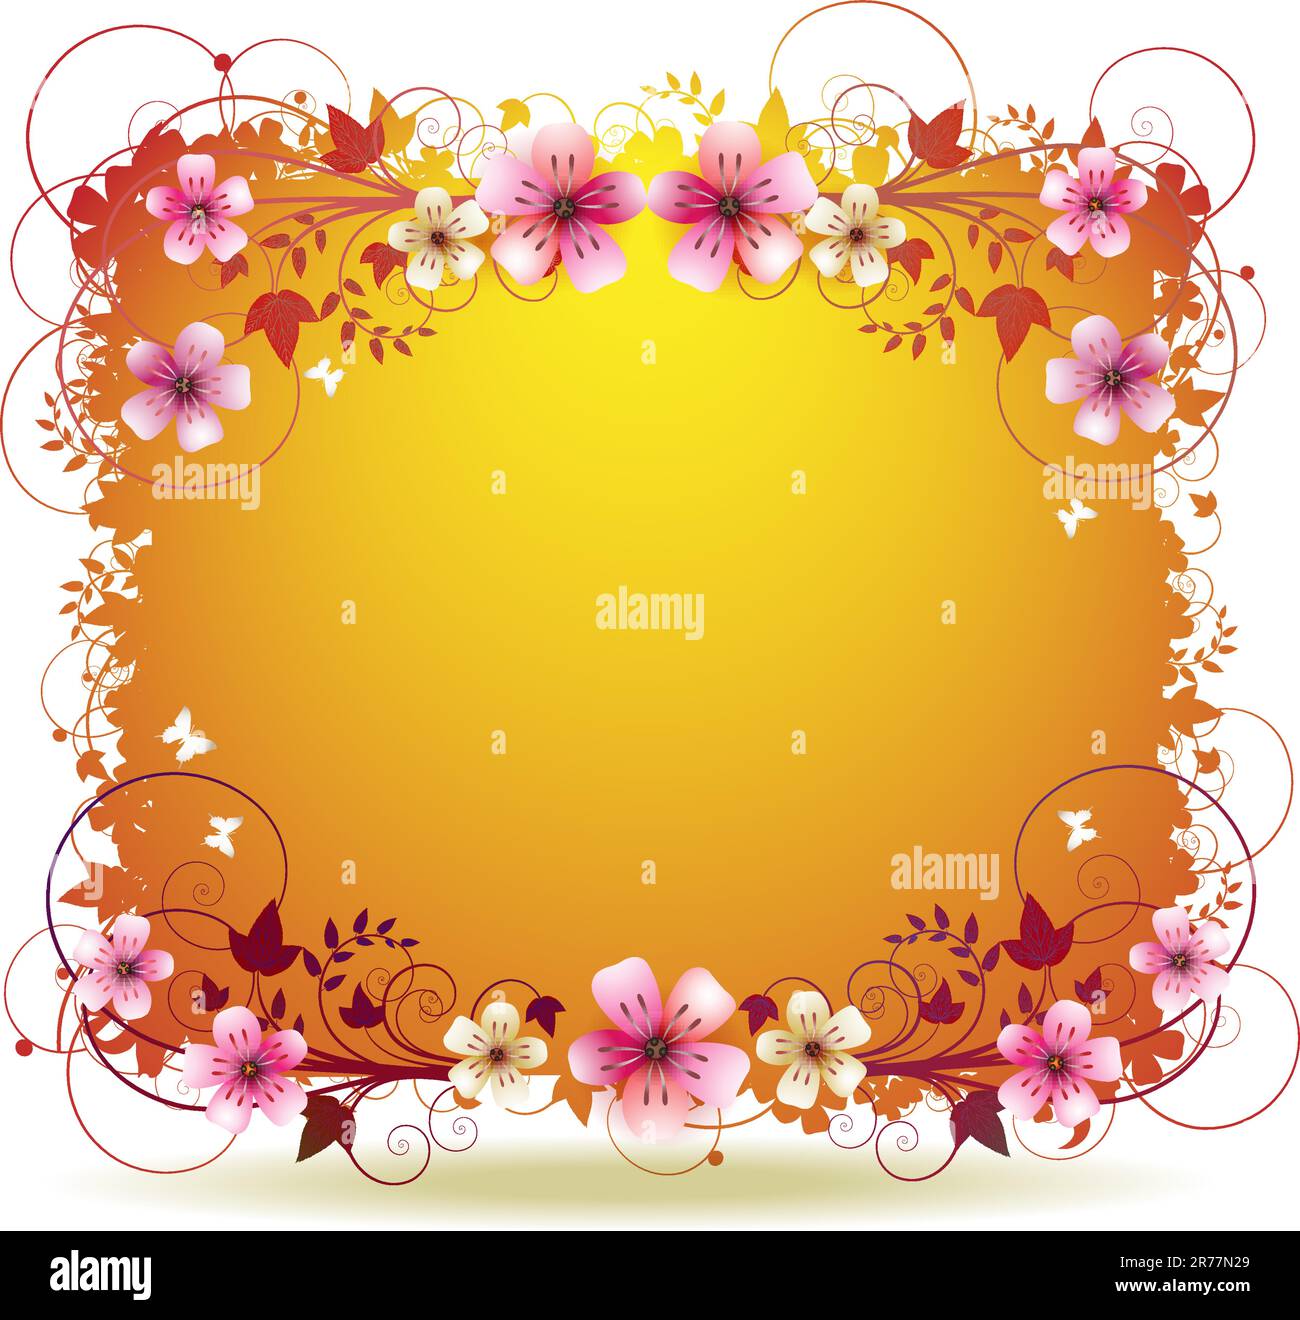 Orange background with flowers and butterflies isolated on white Stock Vector